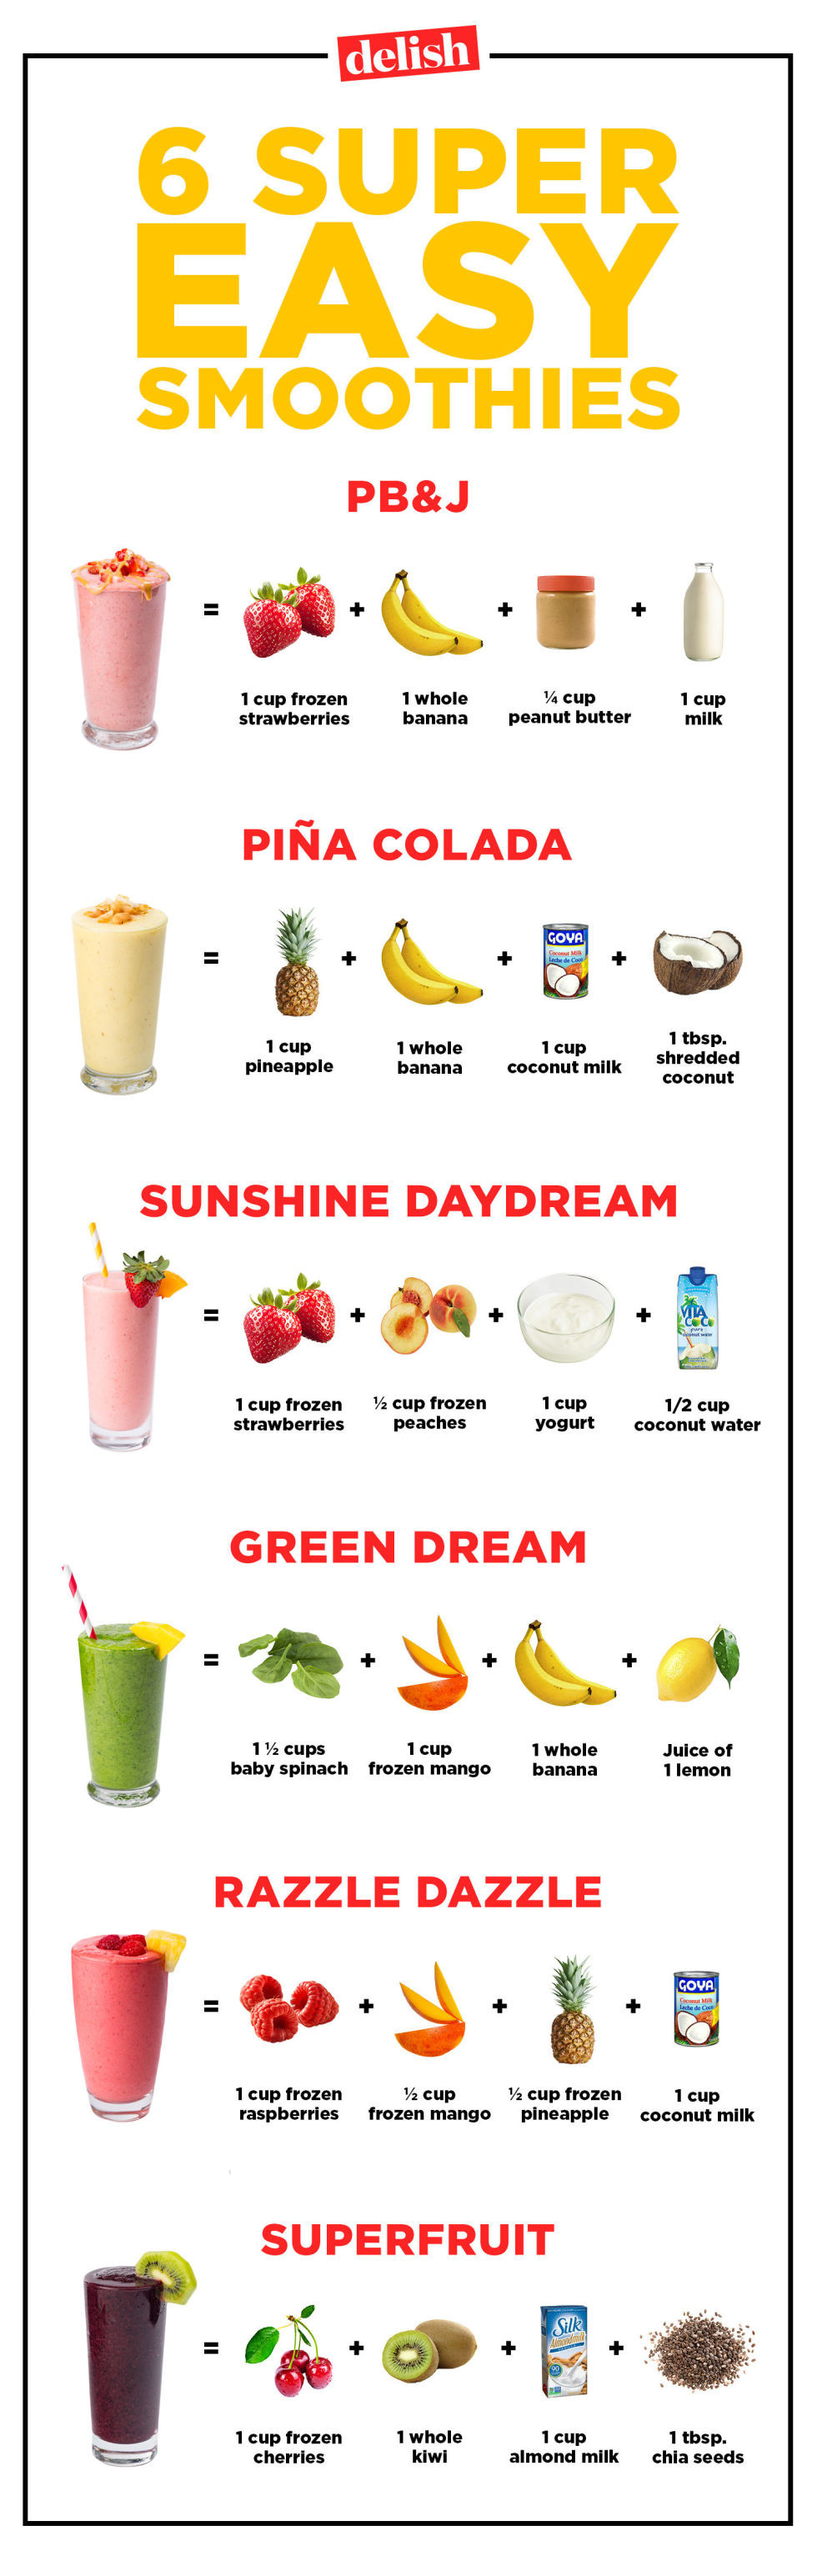 Healthy Smoothies Recipe
 healthy fruit smoothie recipes